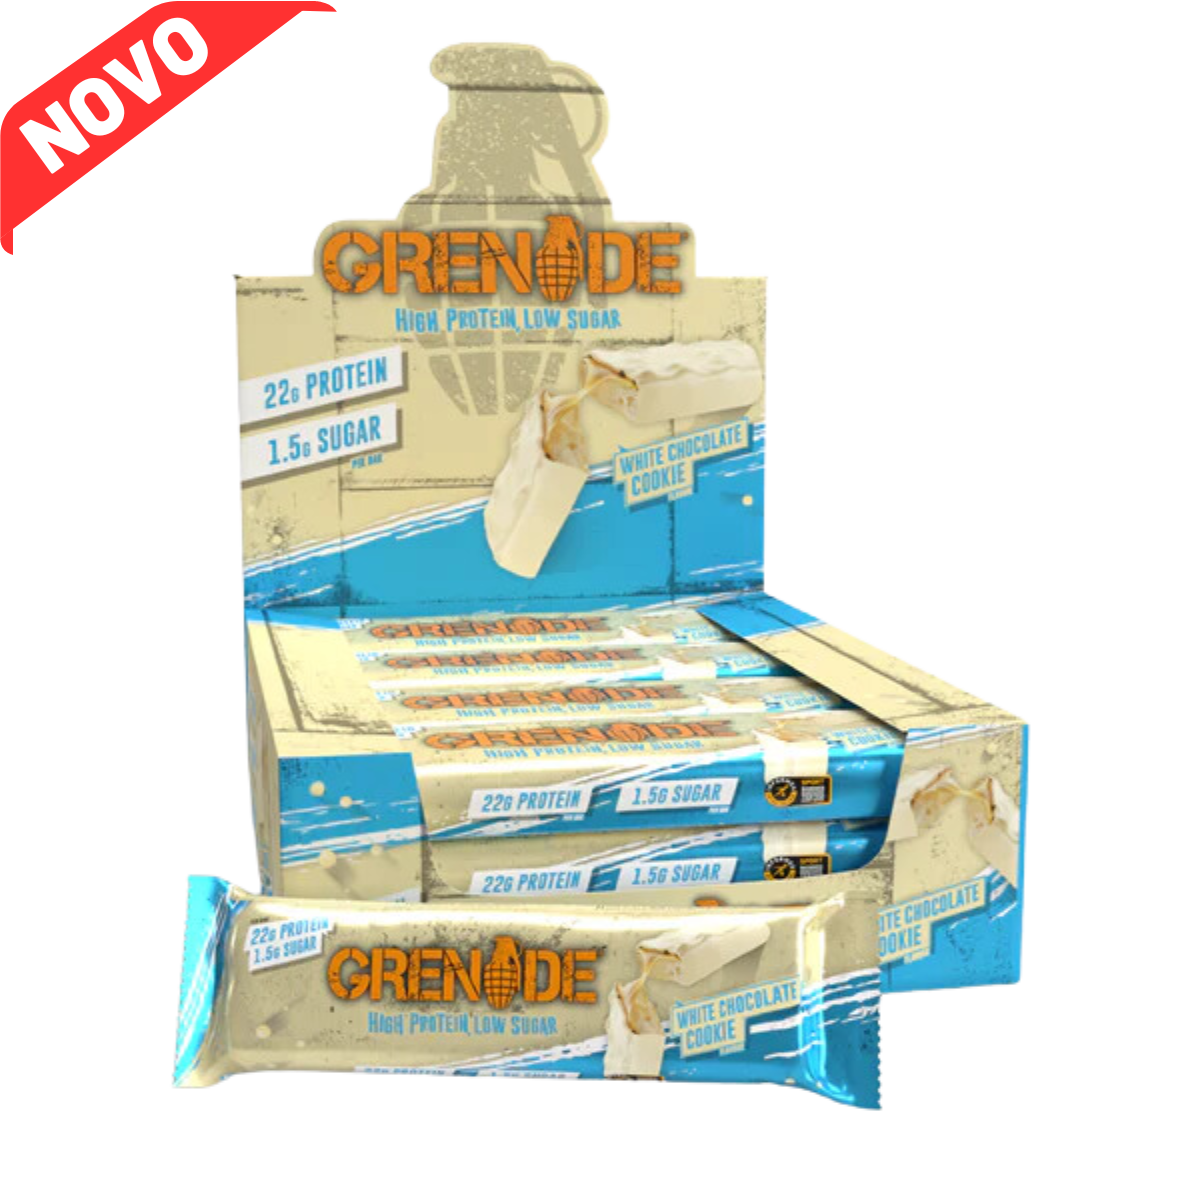 Grenade Protein Bar White Chocolate Cookie